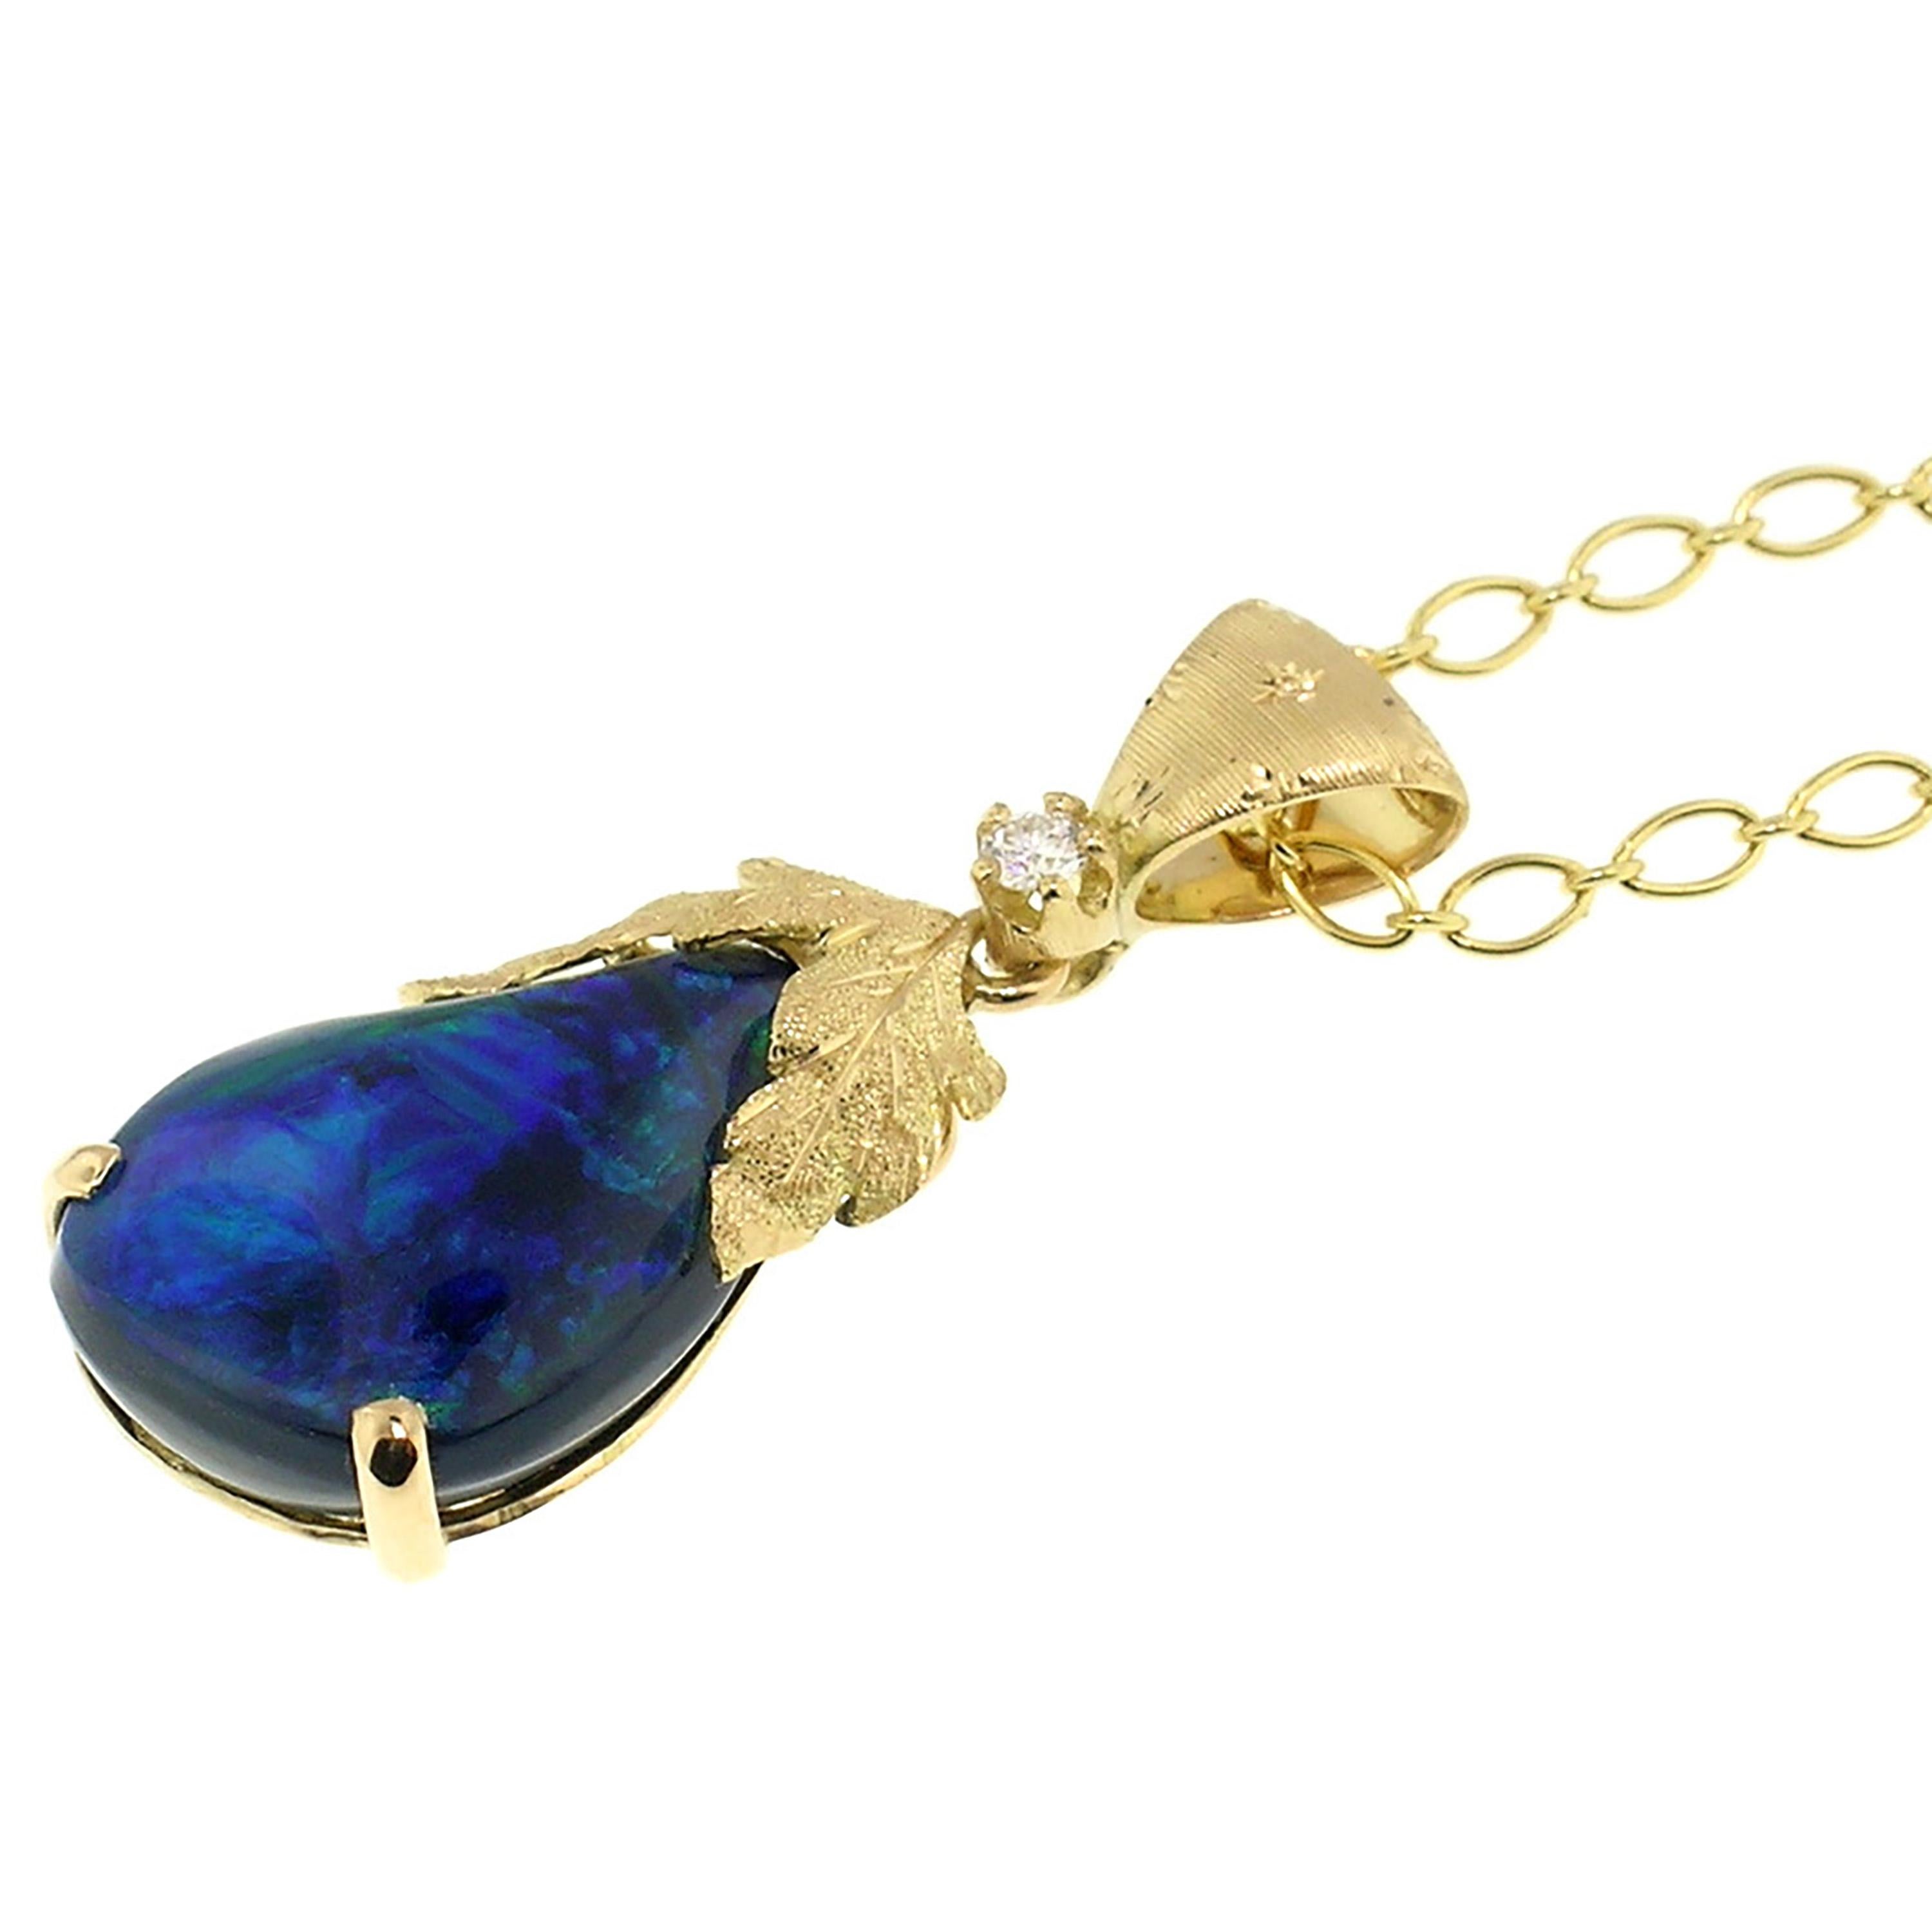 5.98 Carat Black Opal and 18 Karat Gold Hand-Engraved Necklace Handmade in Italy